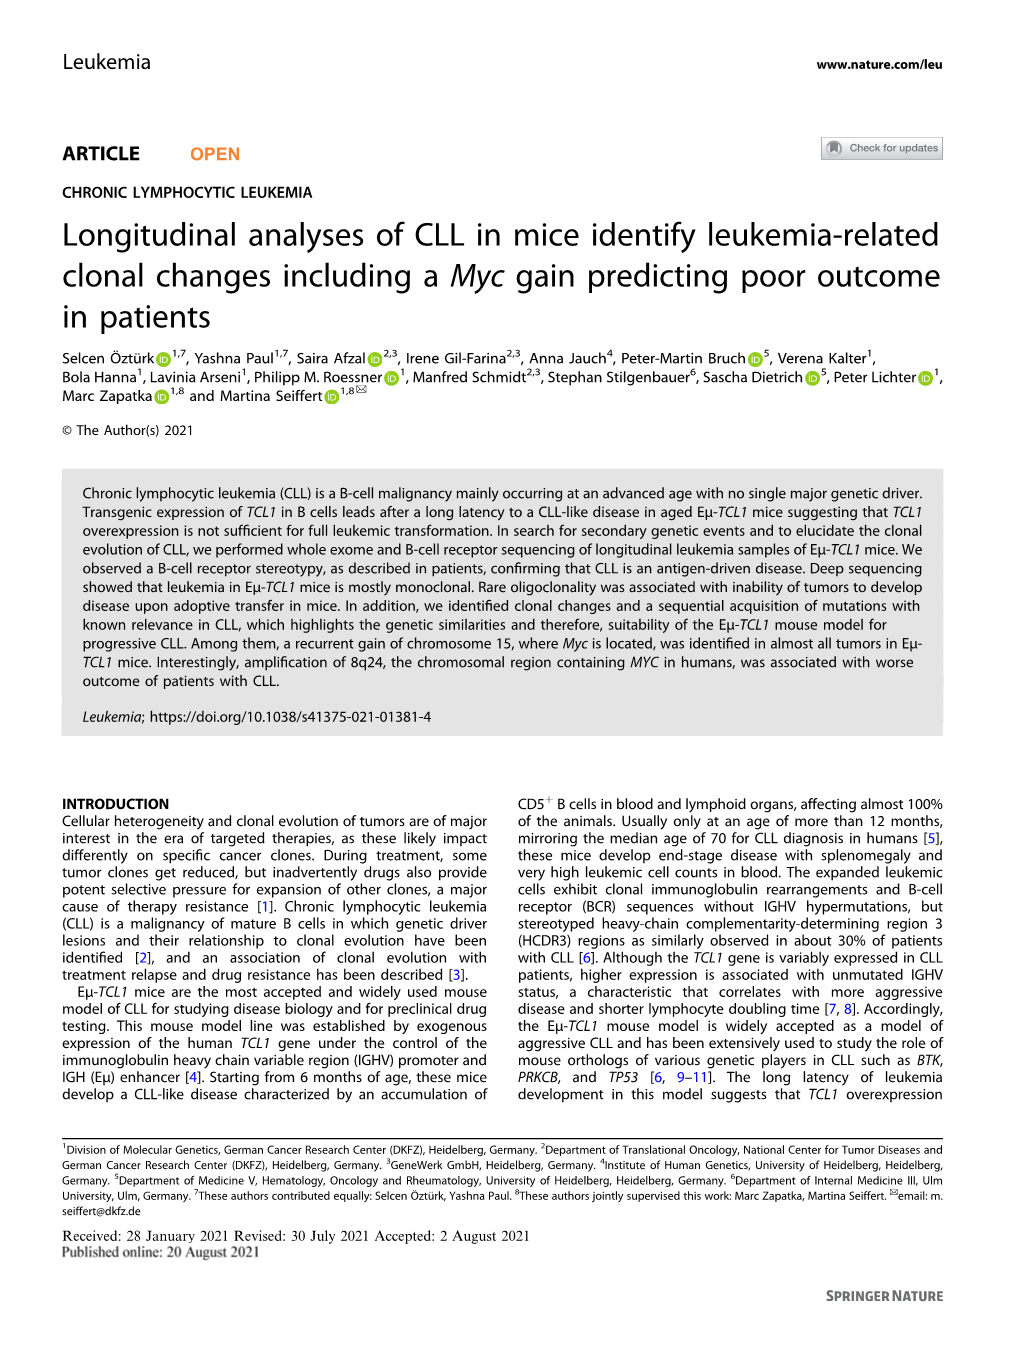 Longitudinal Analyses of CLL in Mice Identify Leukemia-Related Clonal Changes Including a Myc Gain Predicting Poor Outcome in Patients